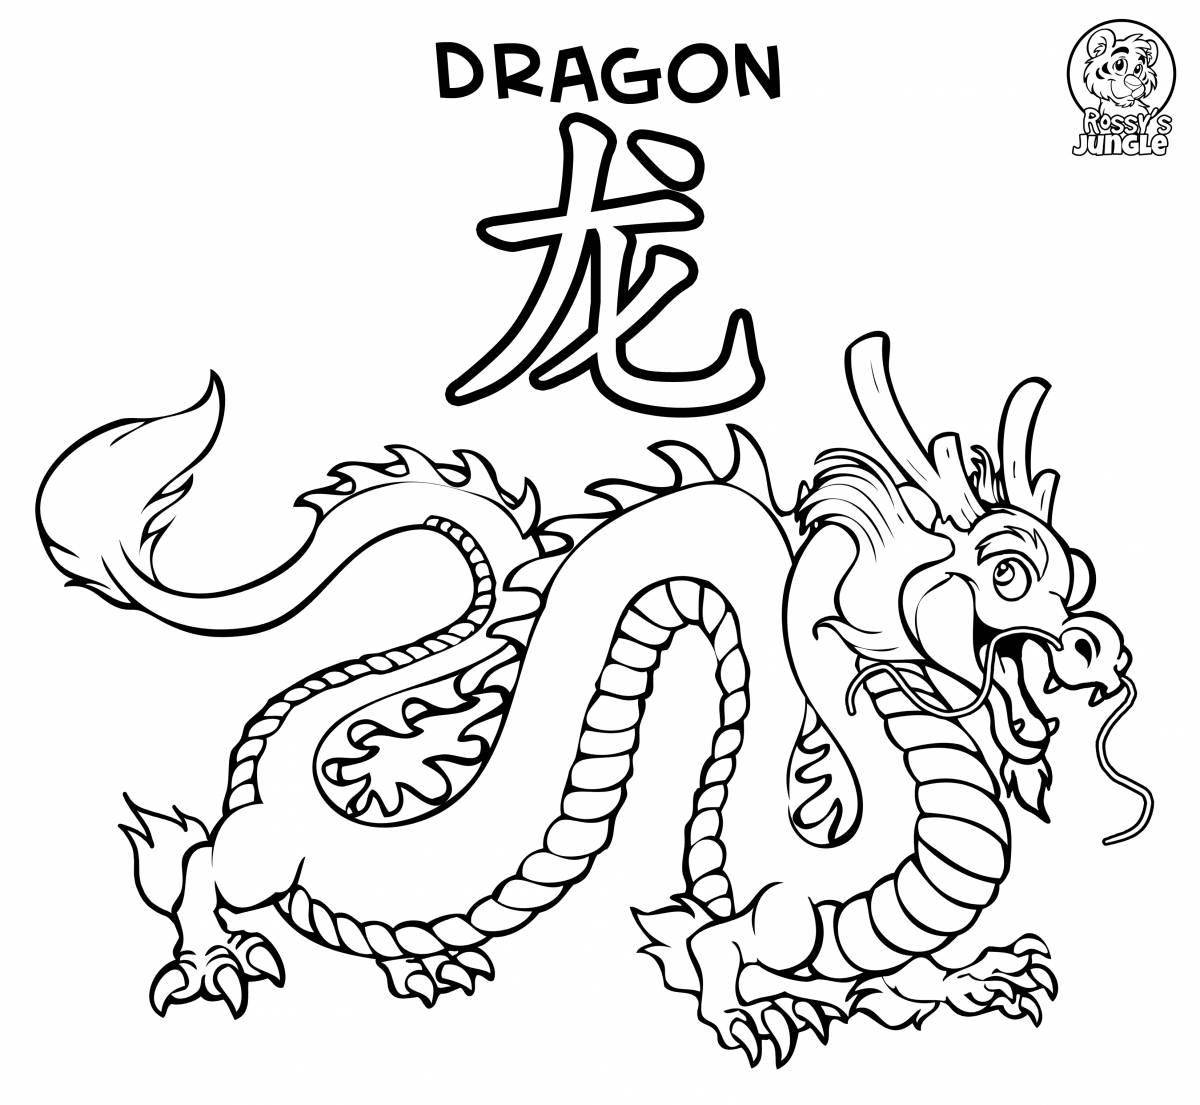 Exquisite Japanese dragon coloring